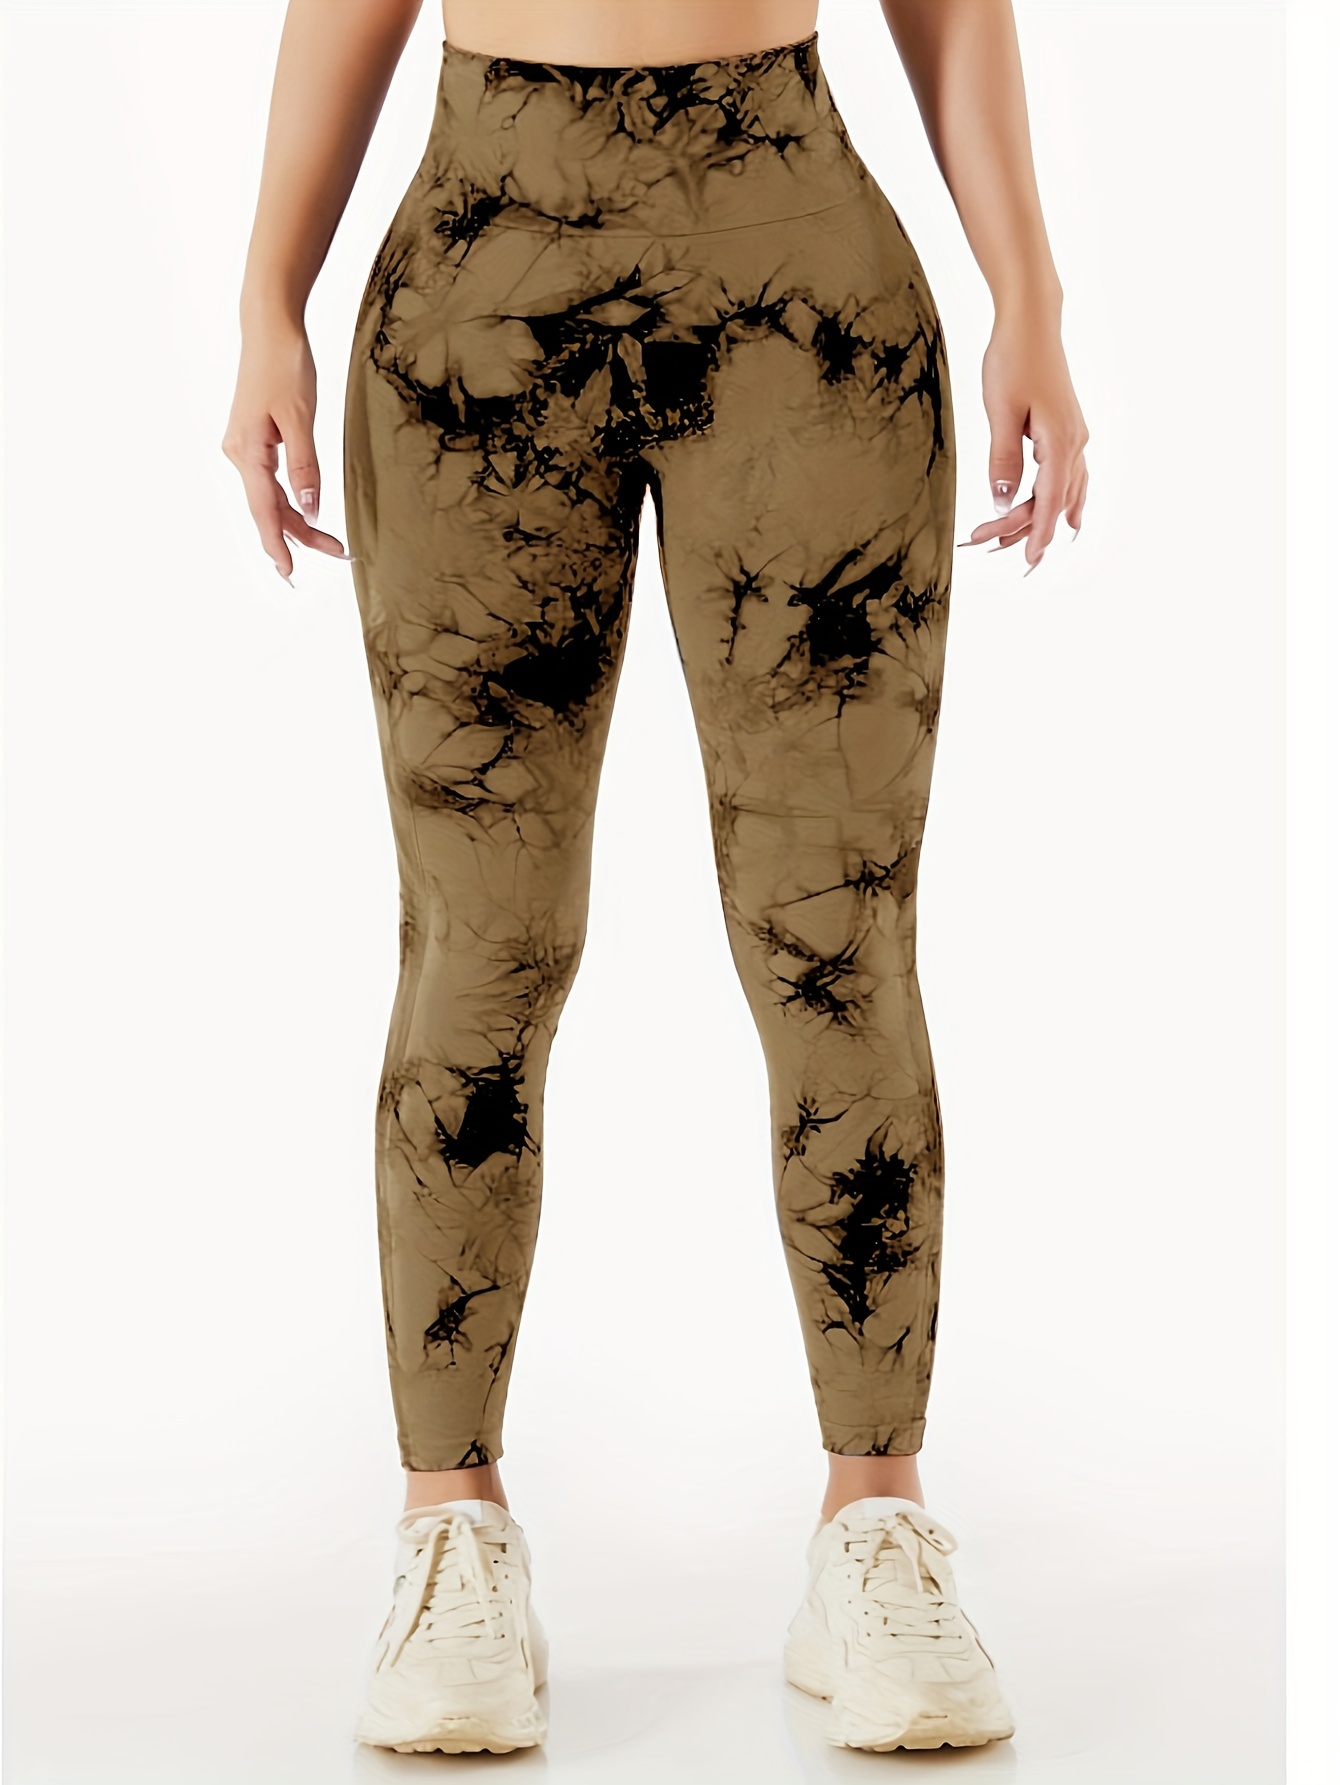 Is That The New Seamless Softness Tie Dye Sports Leggings ??